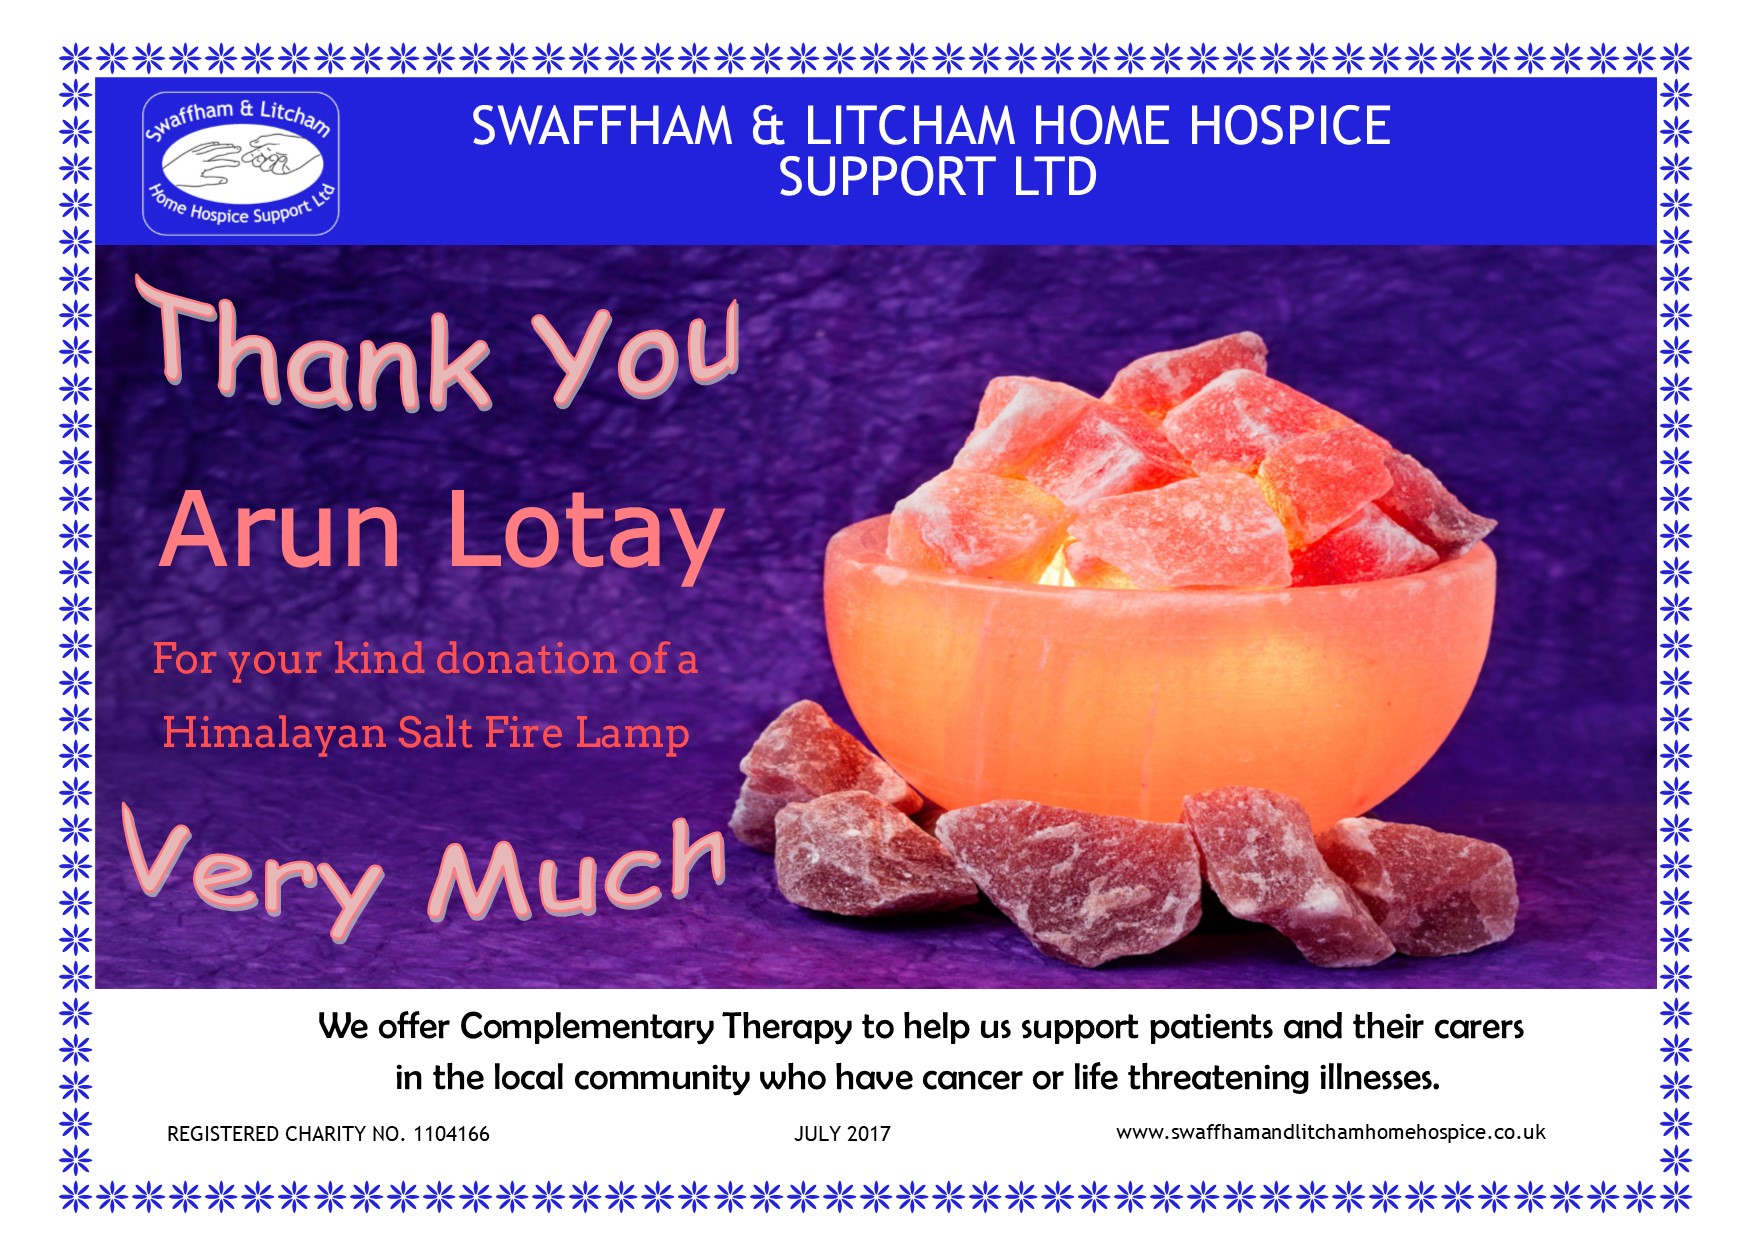 Thanks to Arun Lotay for his donation of a Himalayan Salt Fire Lamp, July 2017